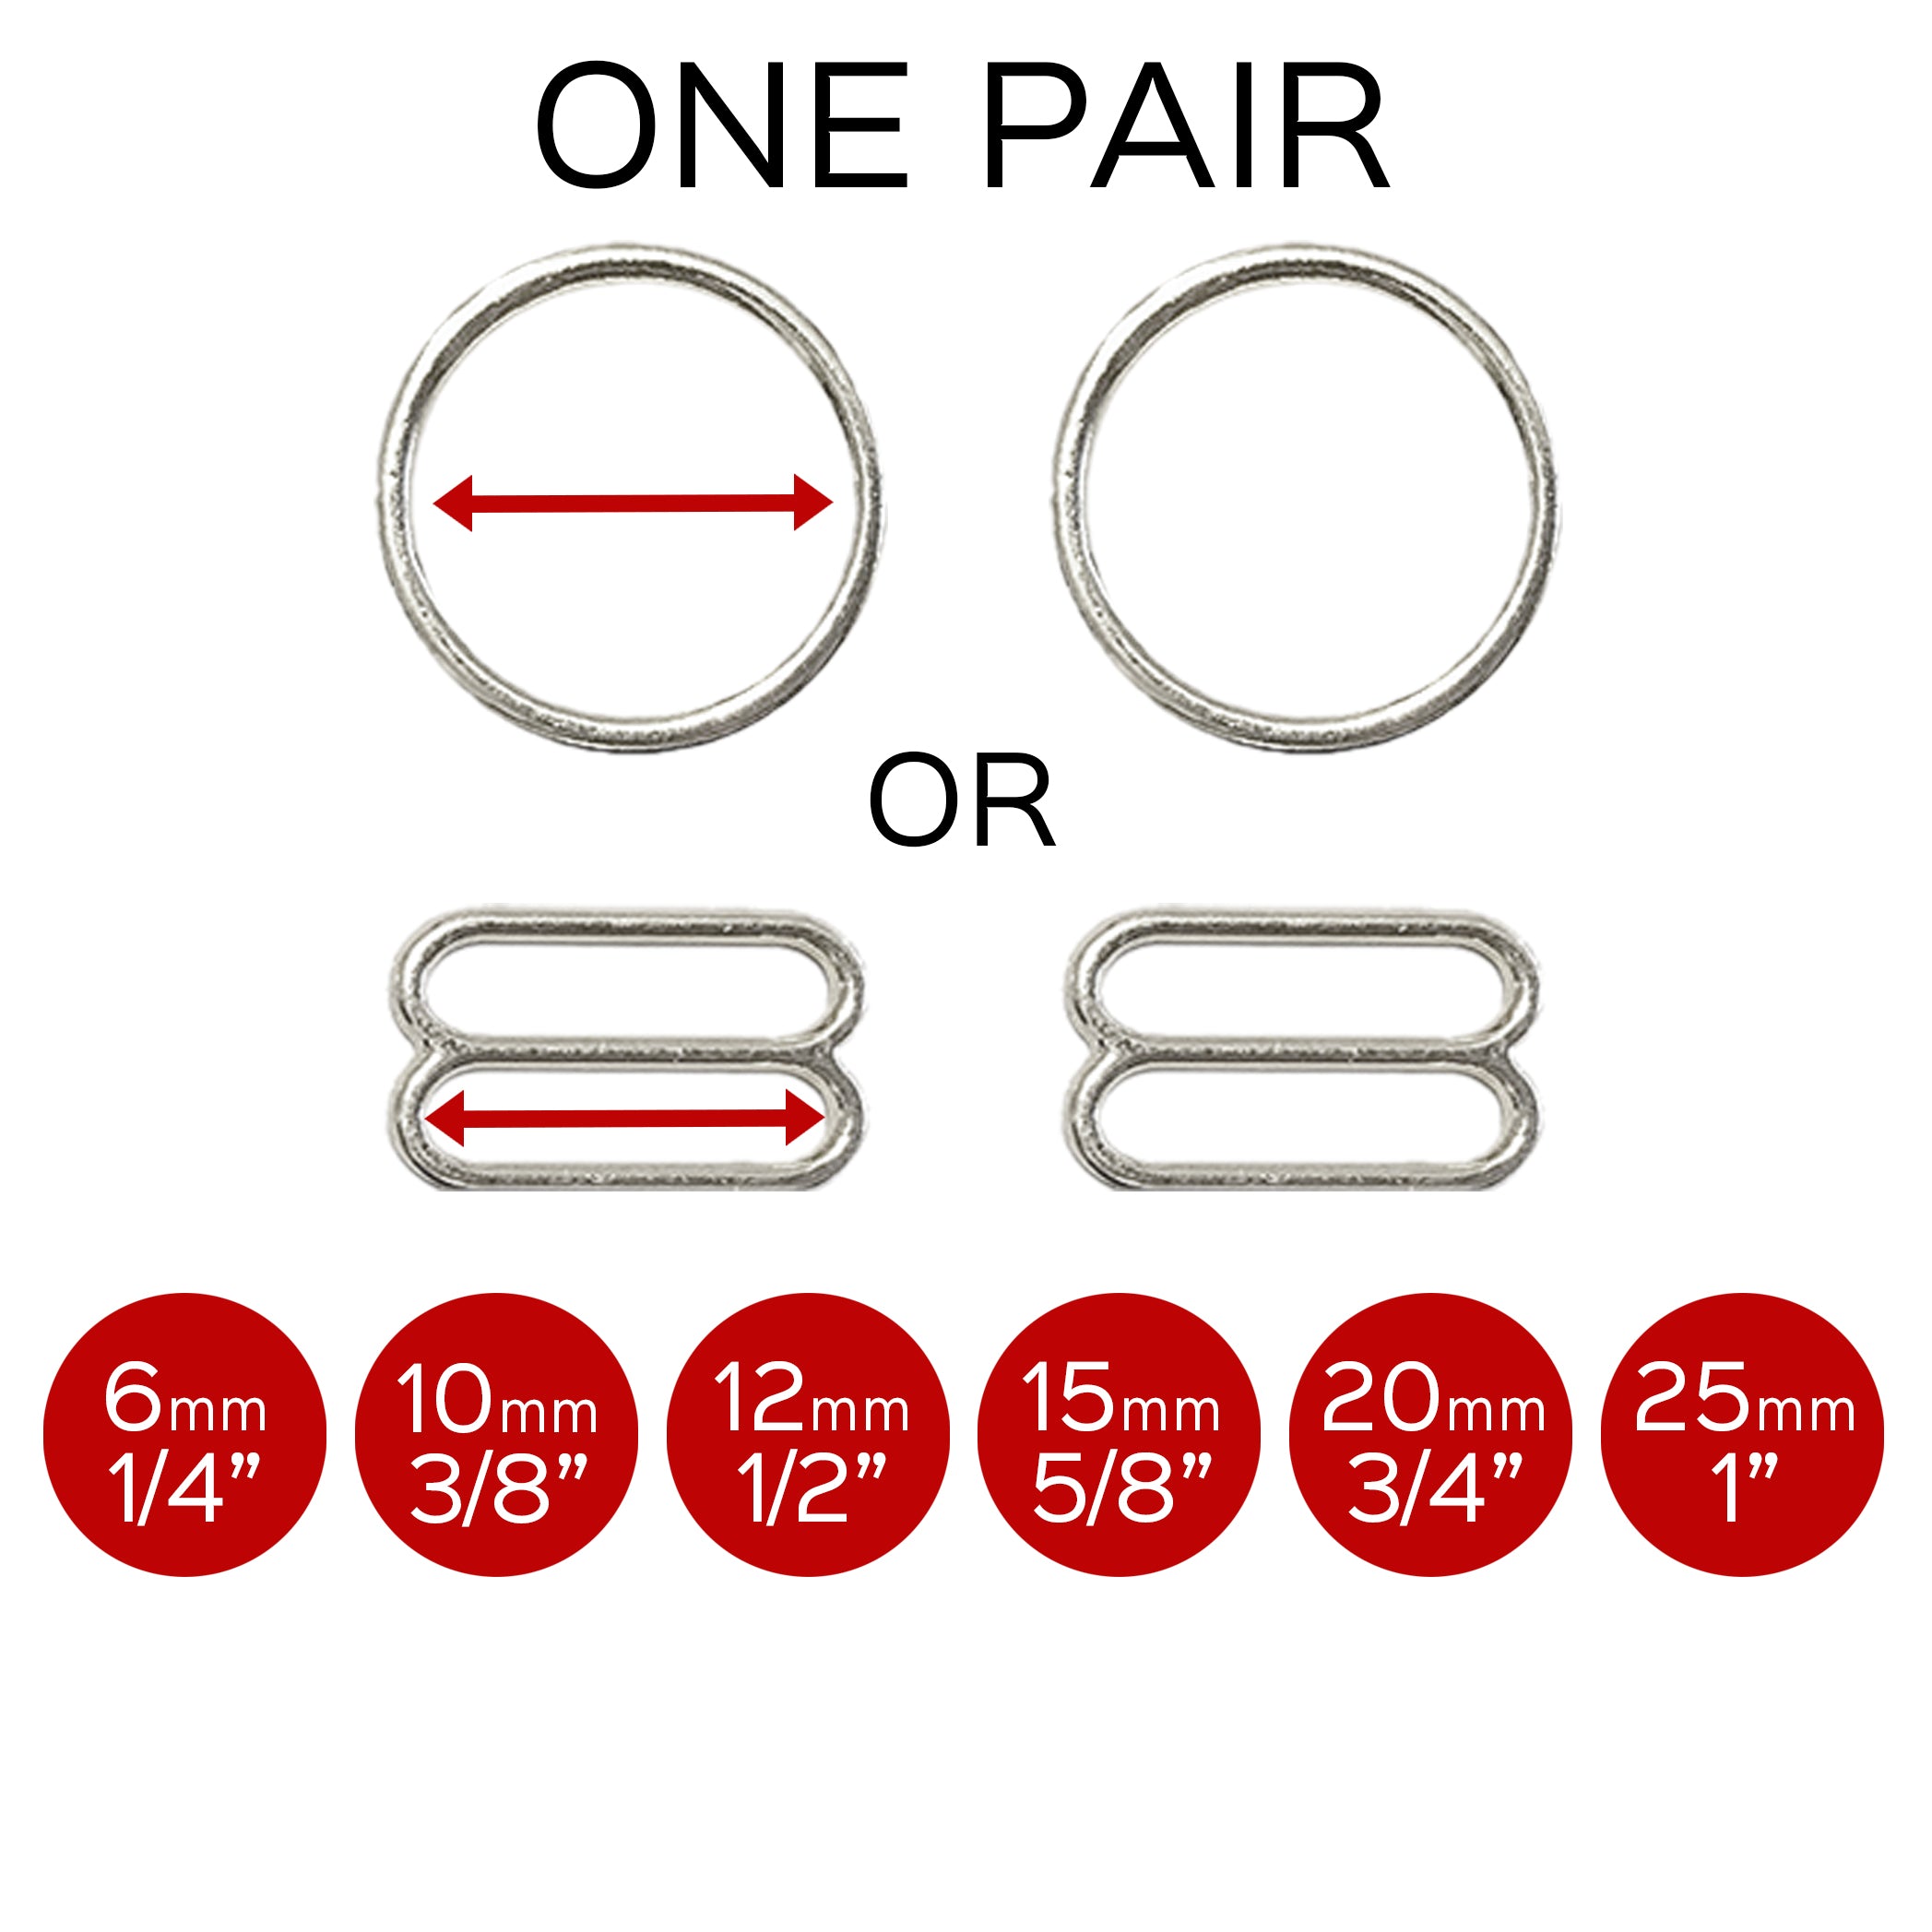 Set of 2 Rings OR 2 Sliders in Silver– 1/4" (6mm), 3/8" (10mm), 1/2" (12mm), 5/8" (15mm), 3/4" (20mm), 1" (25mm)-Stitch Love Studio